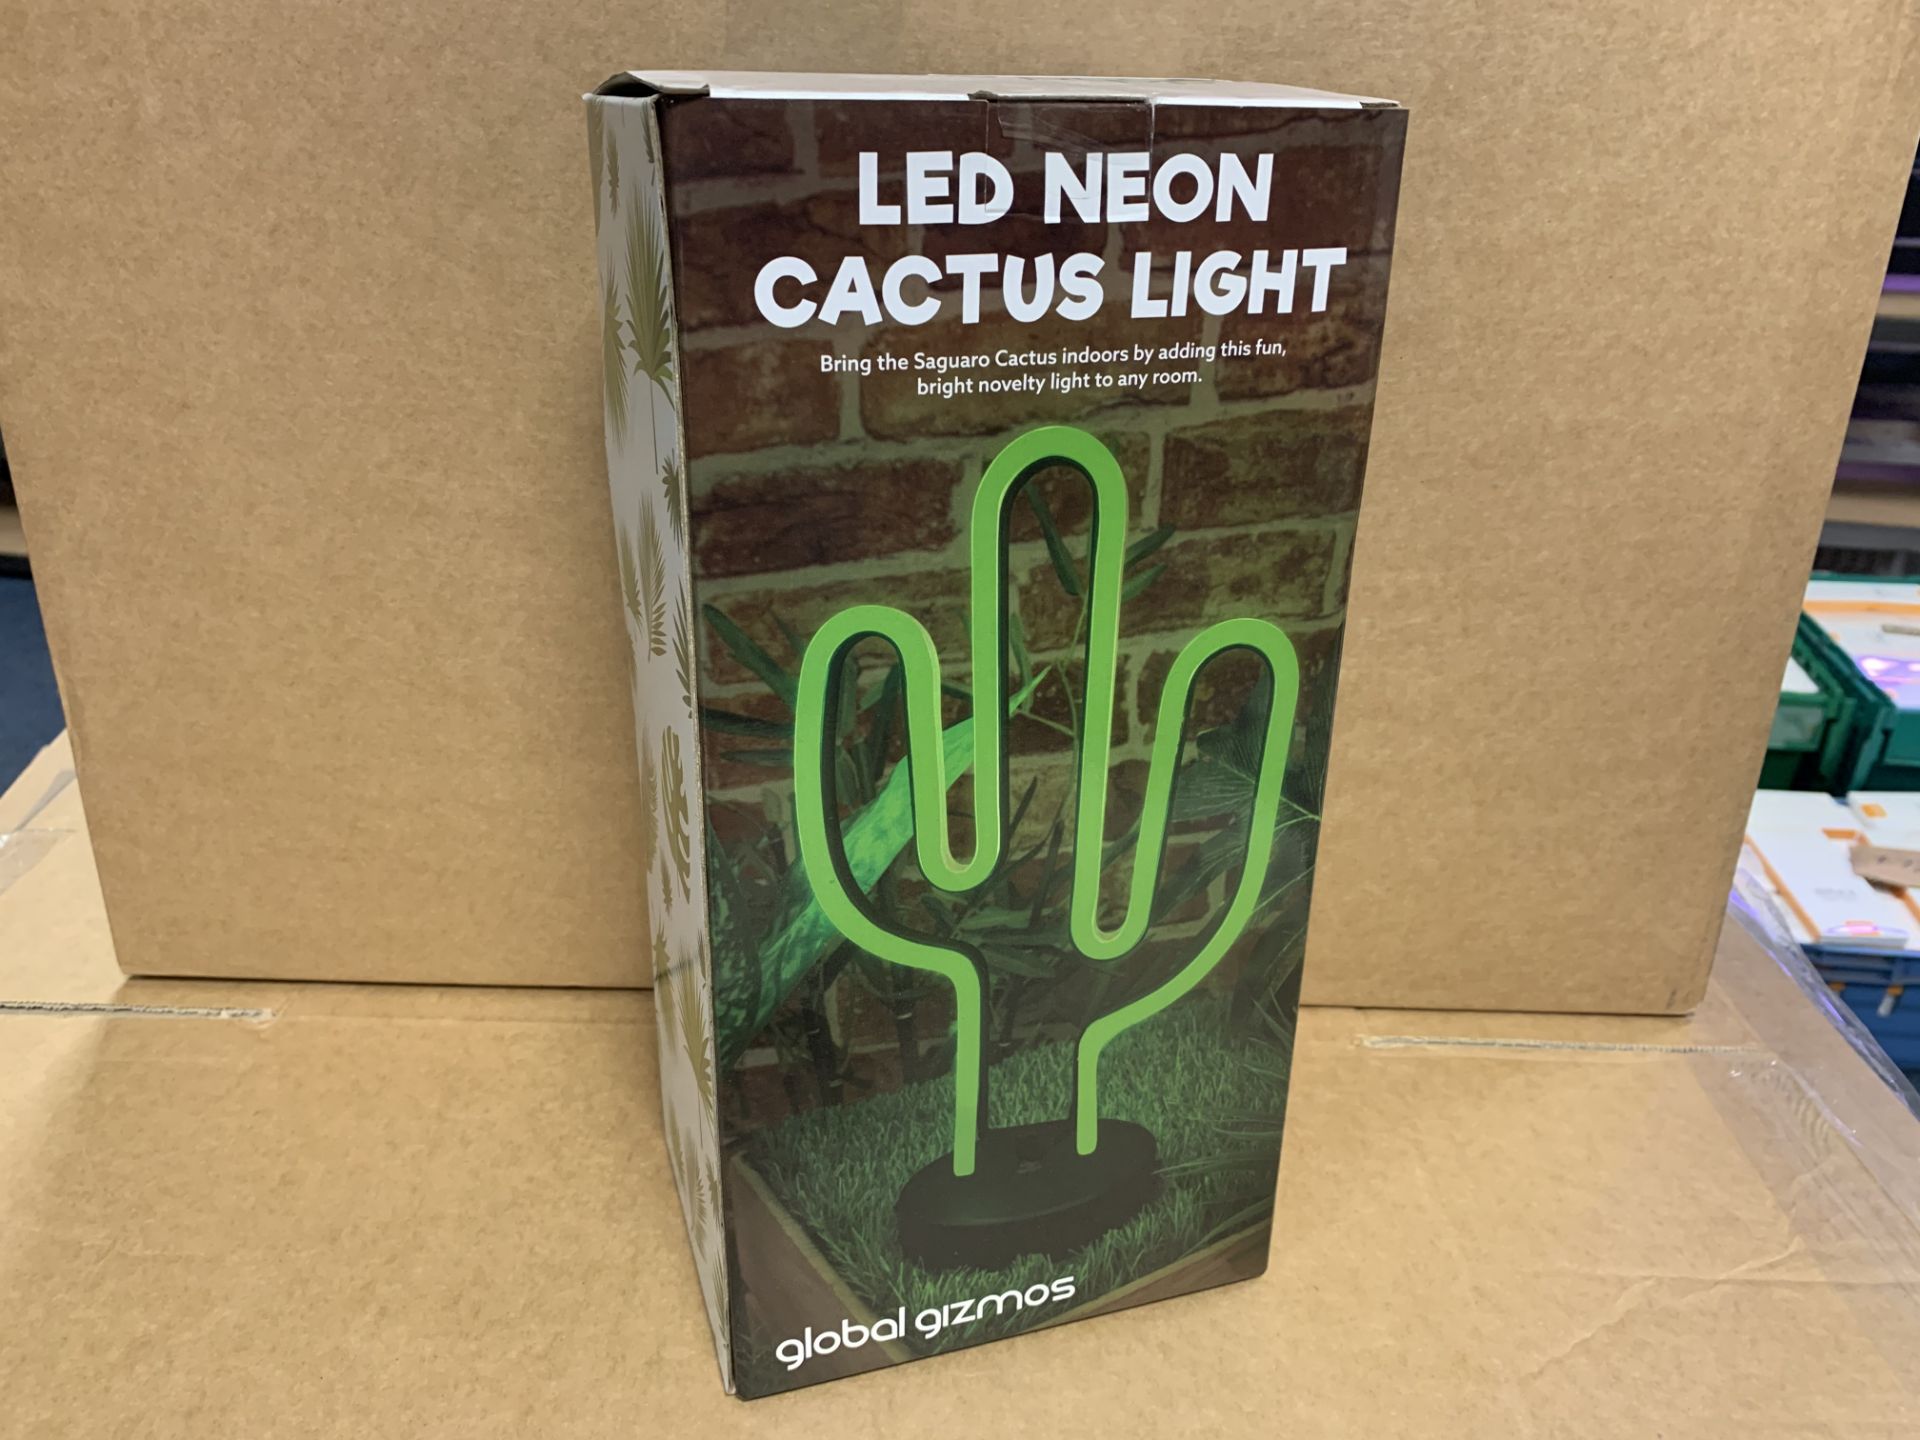 8 X BRAND NEW LED NEON CACTUS LIGHTS BY GLOBAL GIZMOS